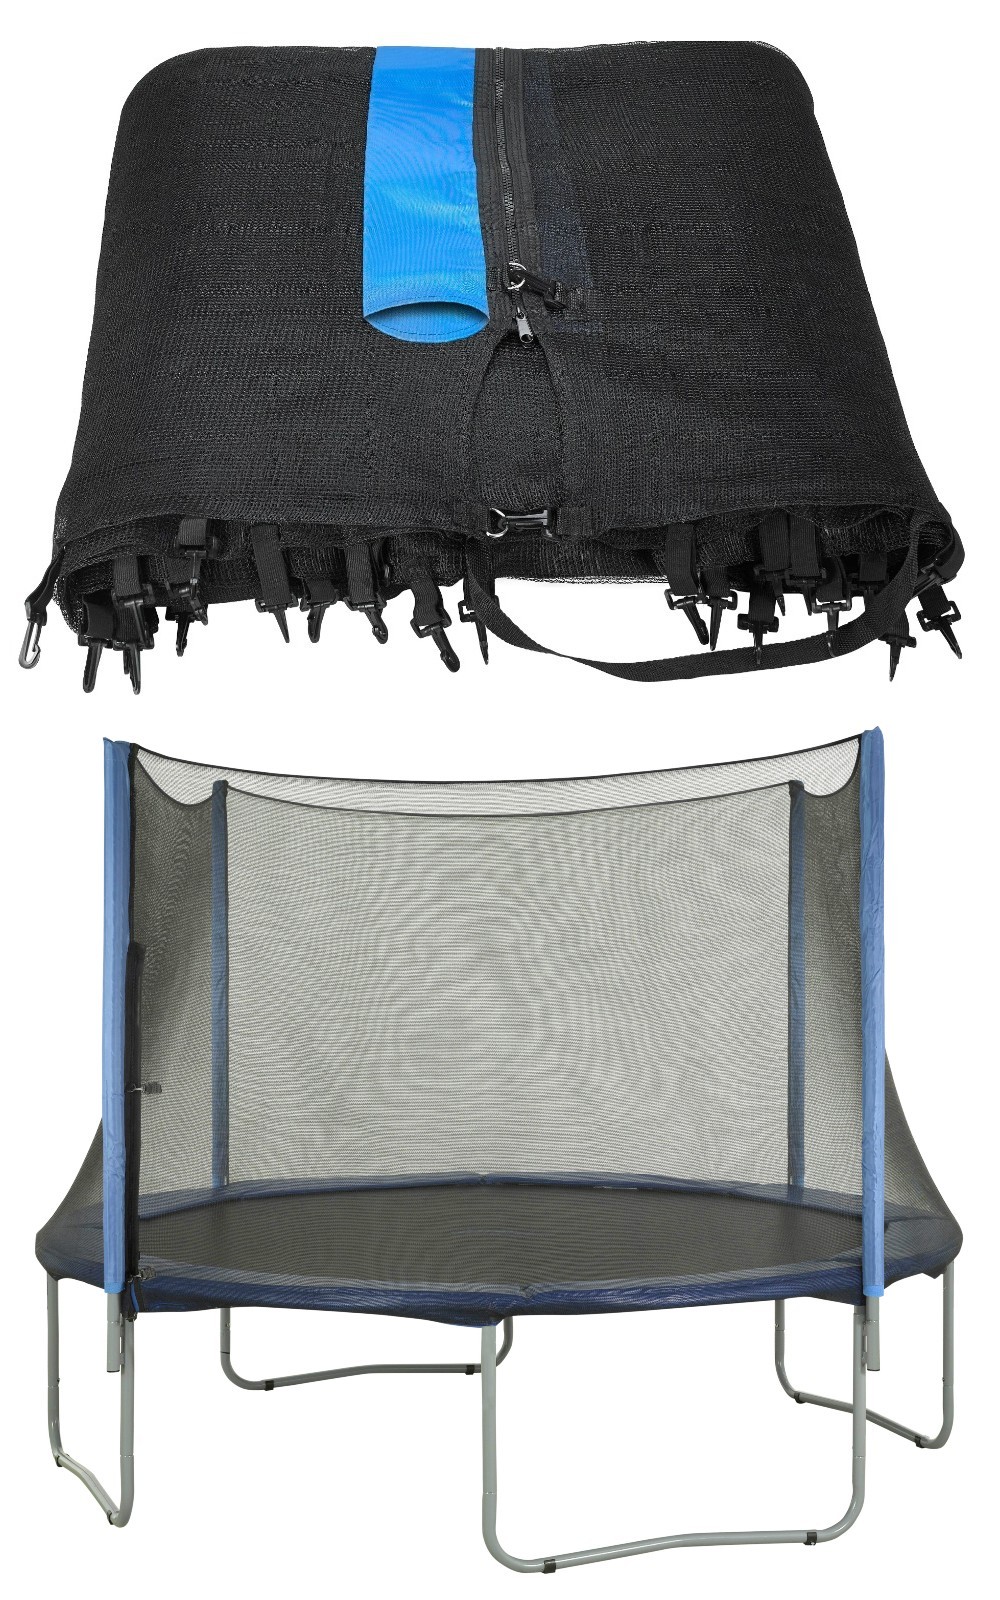 Trampoline Replacement Enclosure Safety Net, fits for 6 FT. Round Frames using 4 Straight Poles - Net Only